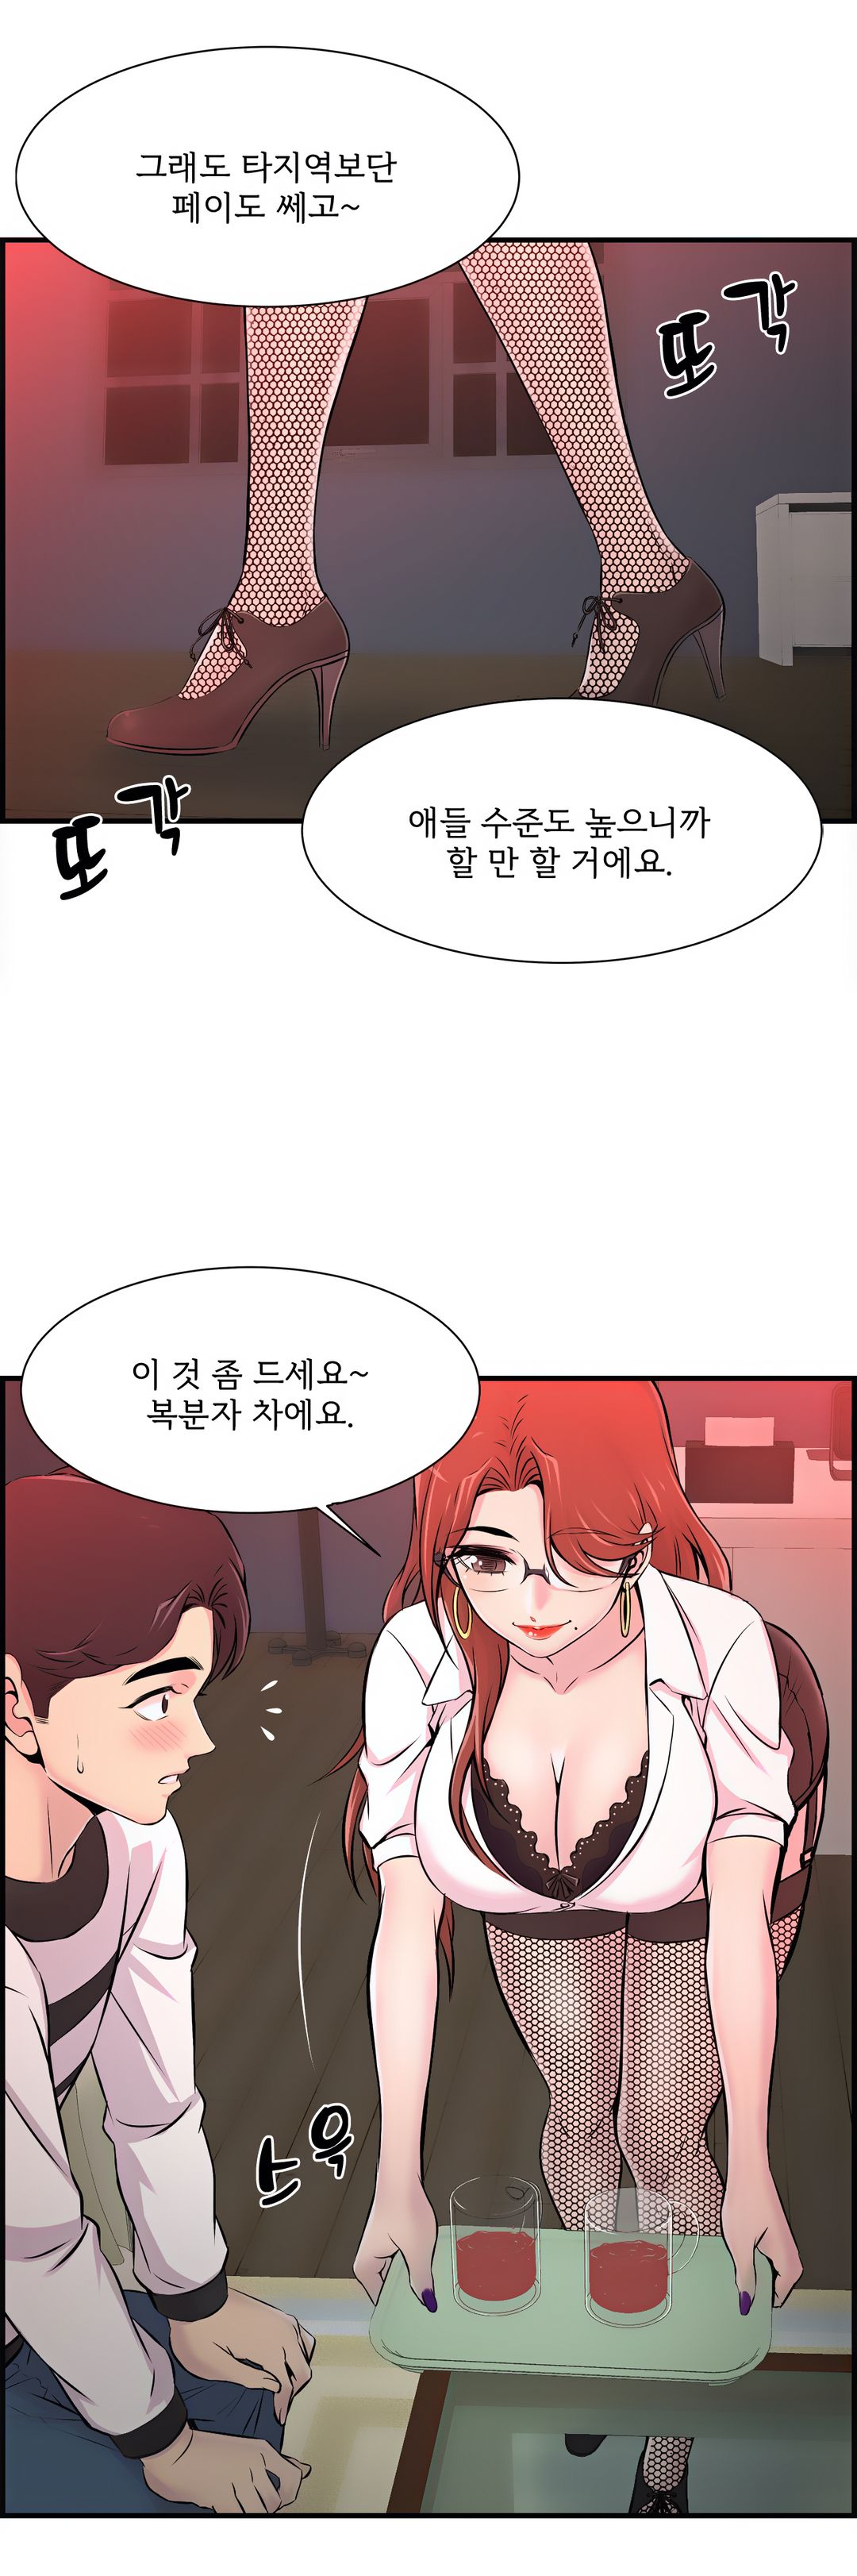 Cram School Scandal Raw - Chapter 8 Page 16